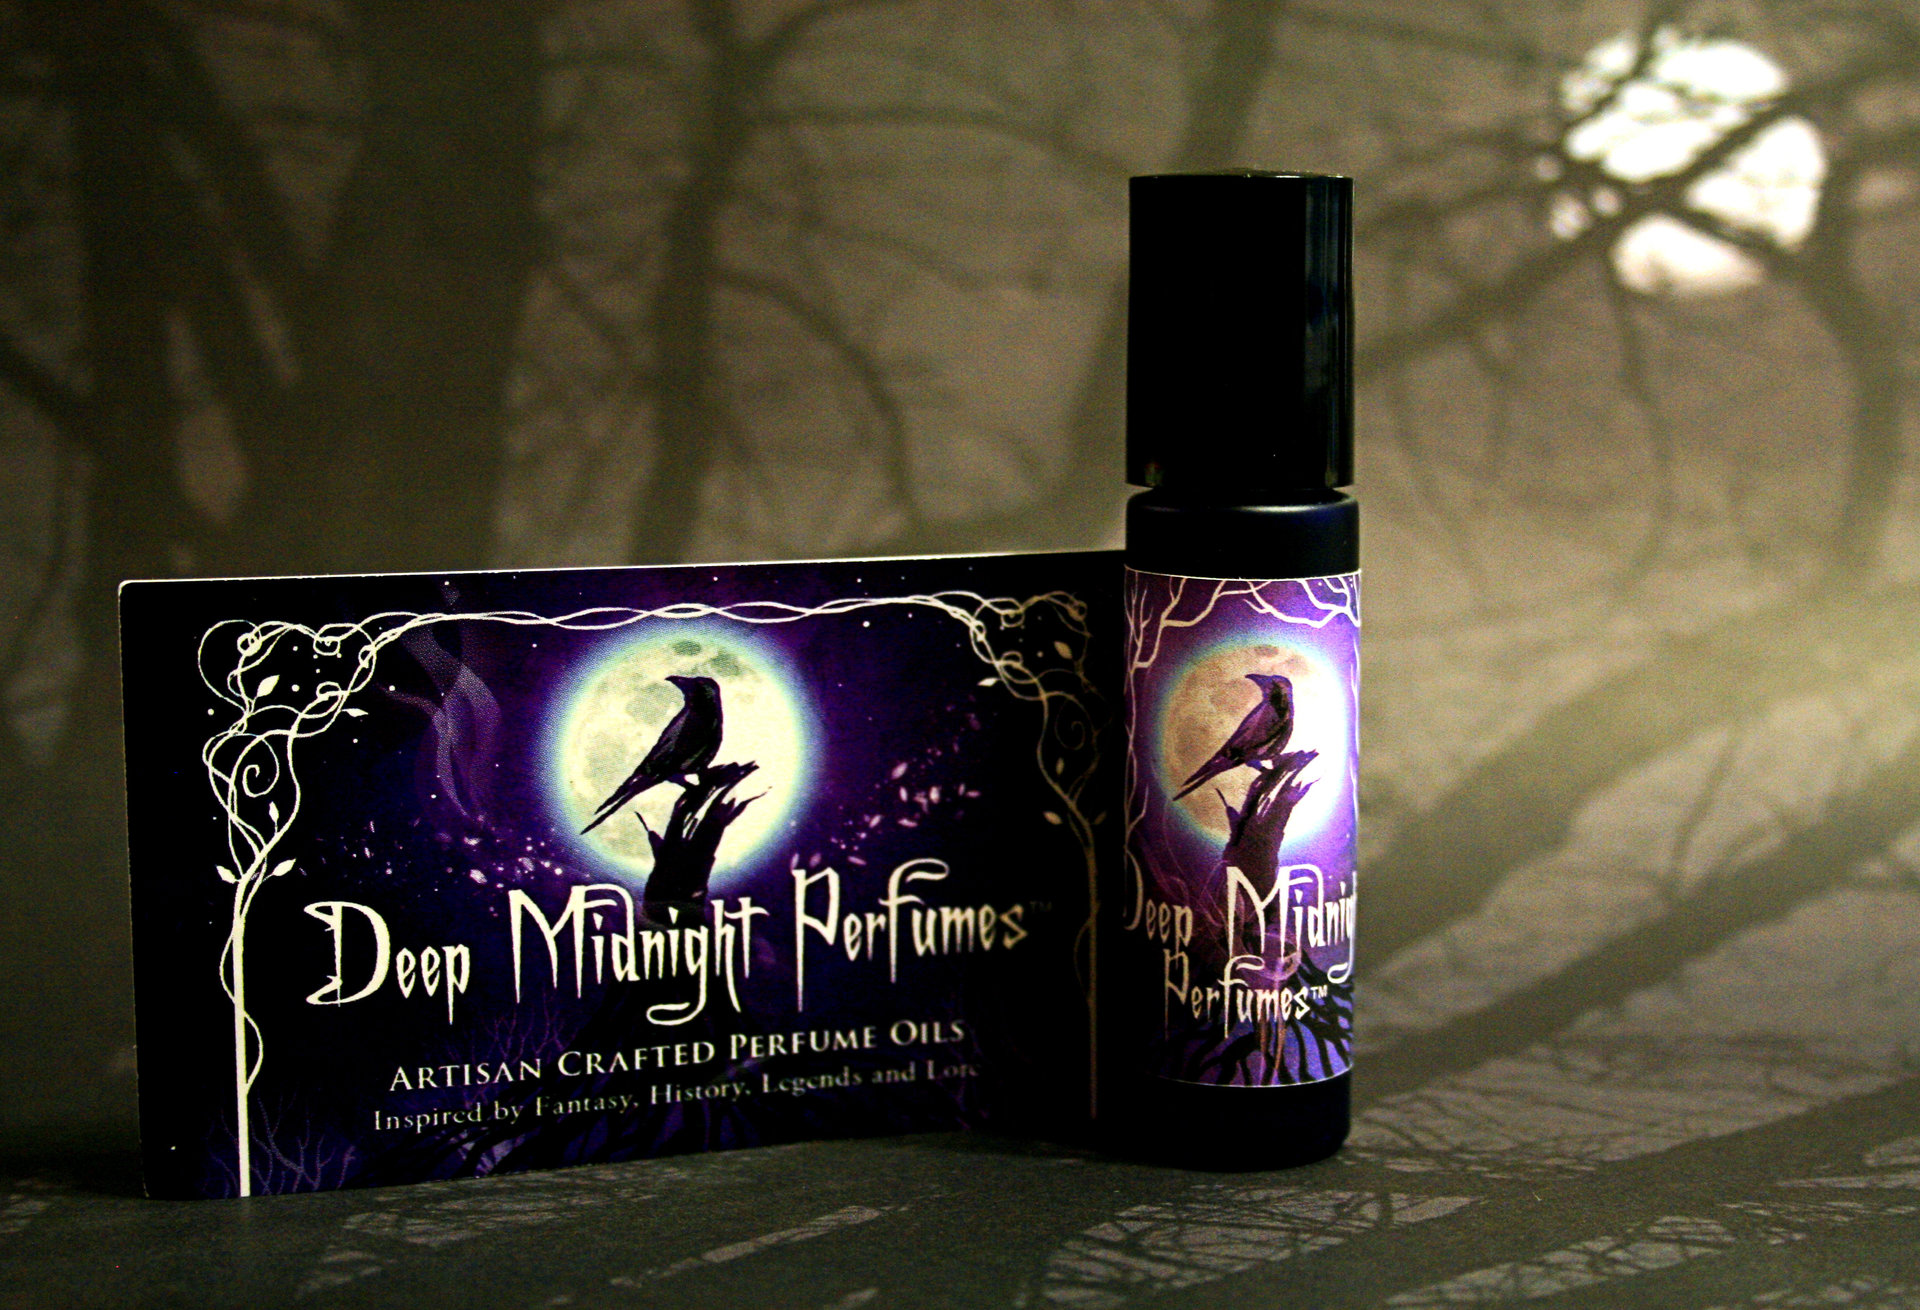 GREY PILGRIM Perfume Oil - Moss, Woods, Stone, Cedar, Leather, Water - Inspired by The Hobbit, Lord of the Rings, Silmarillion